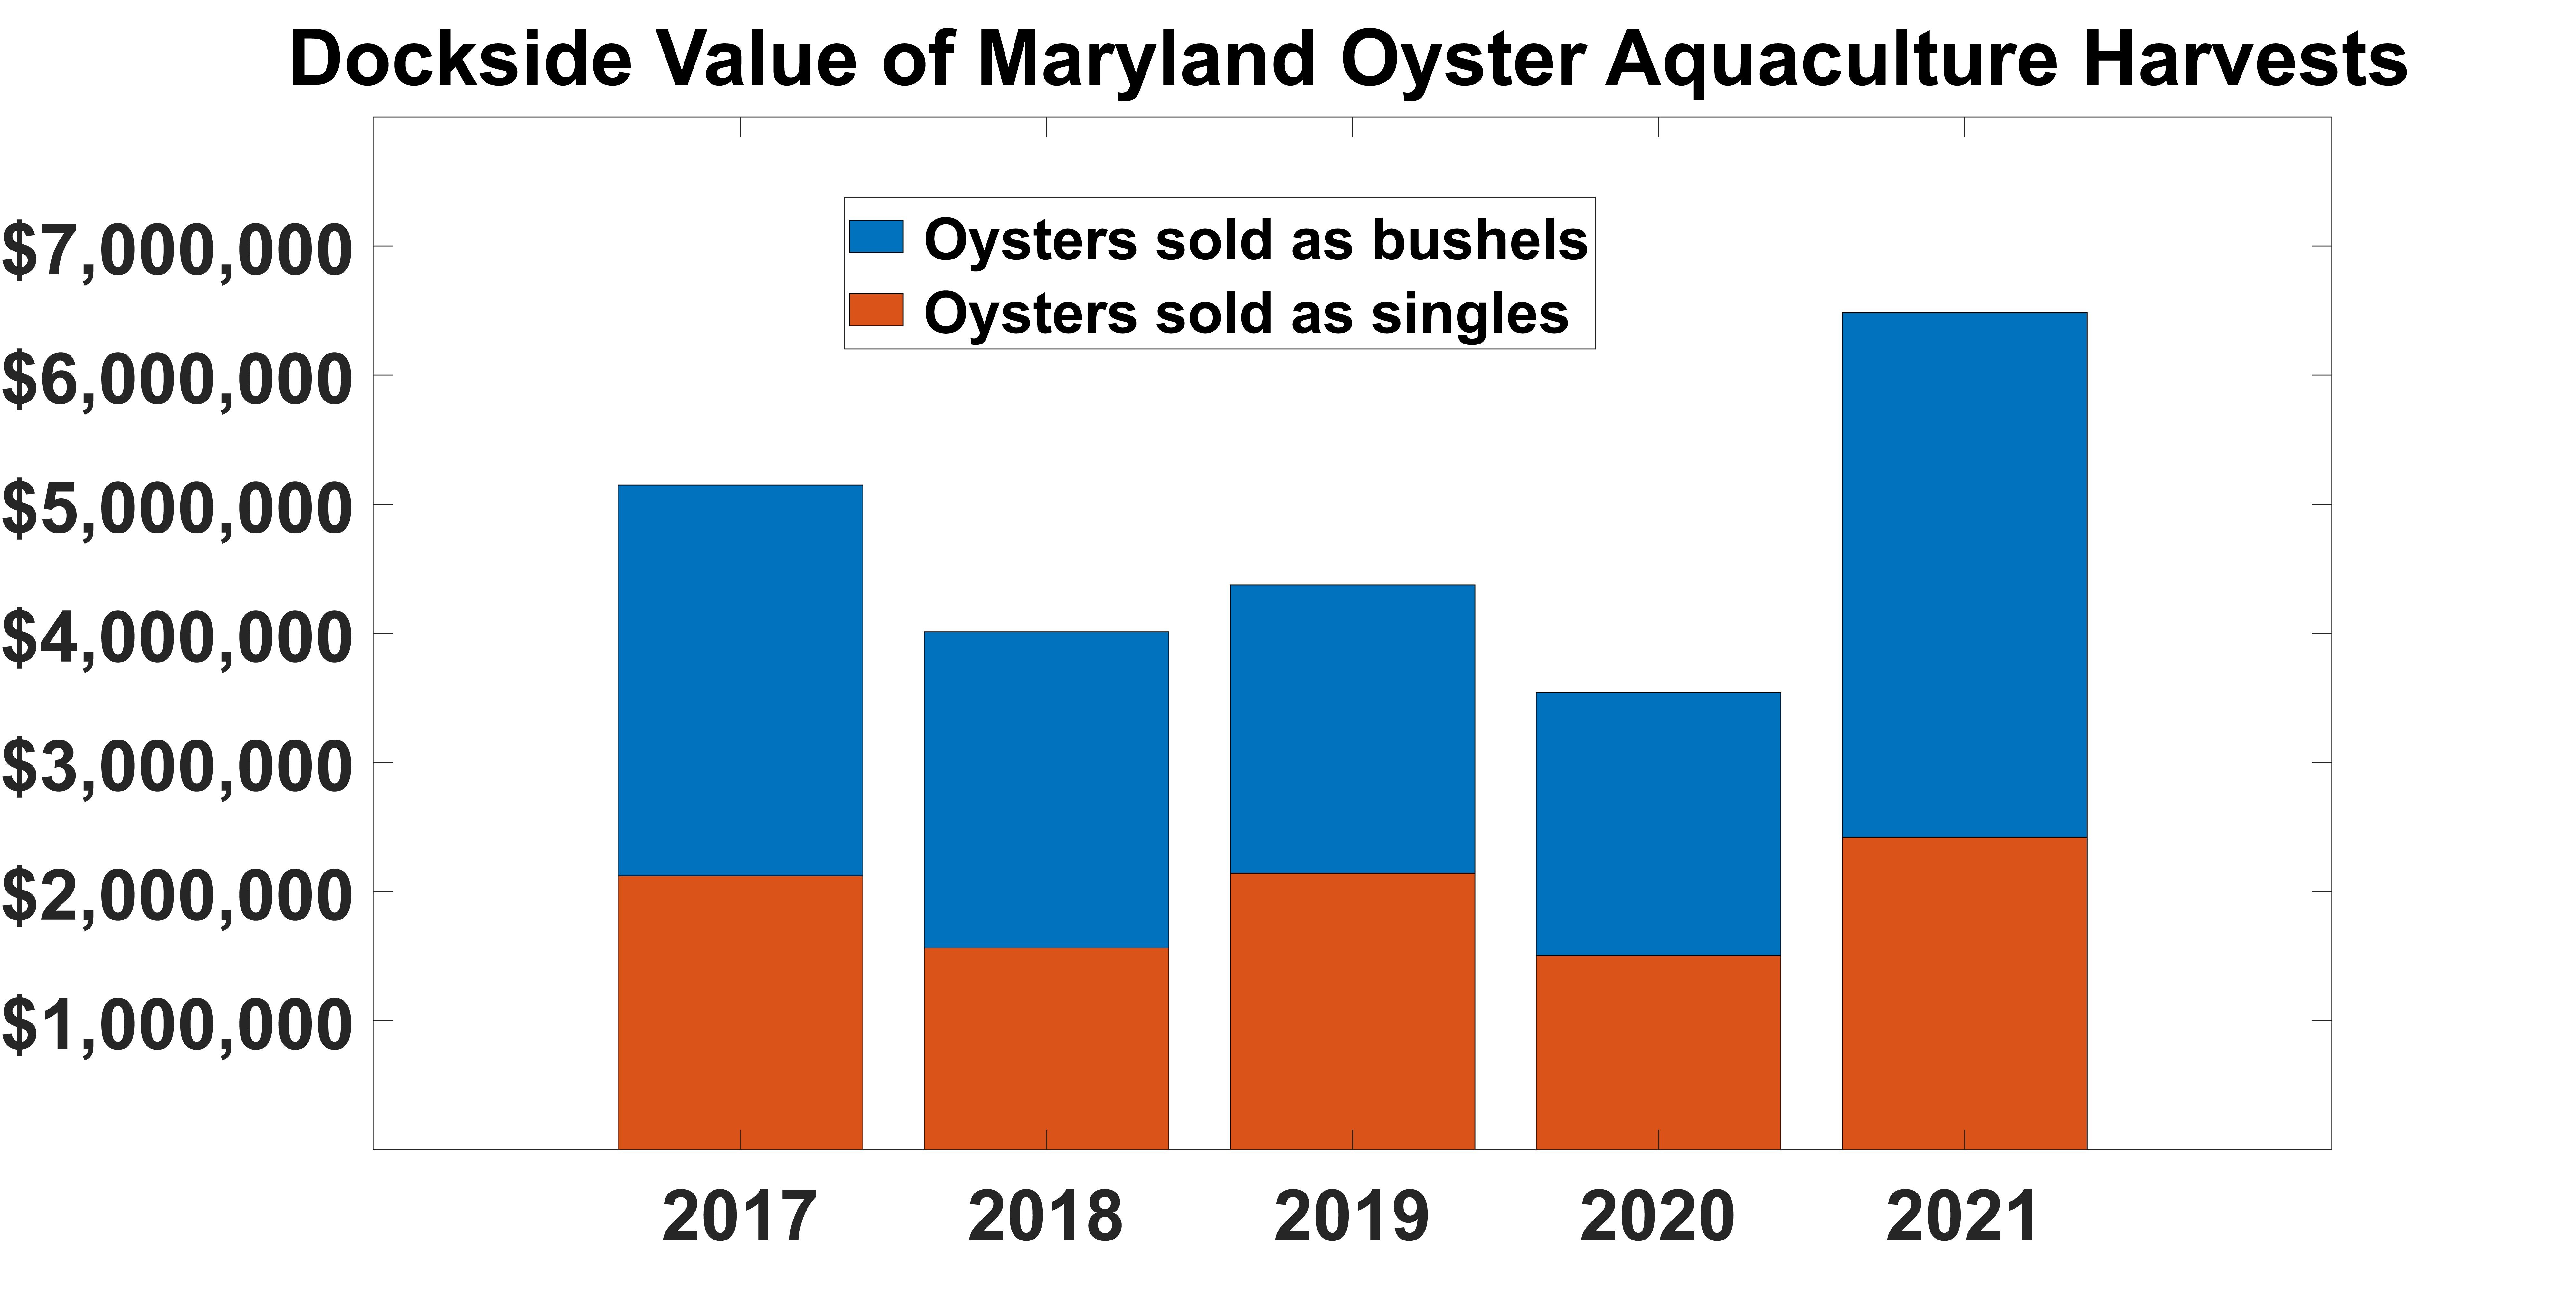 Dockside value of farmed oysters in Maryland 2017-2021 (in USD) bar graph.